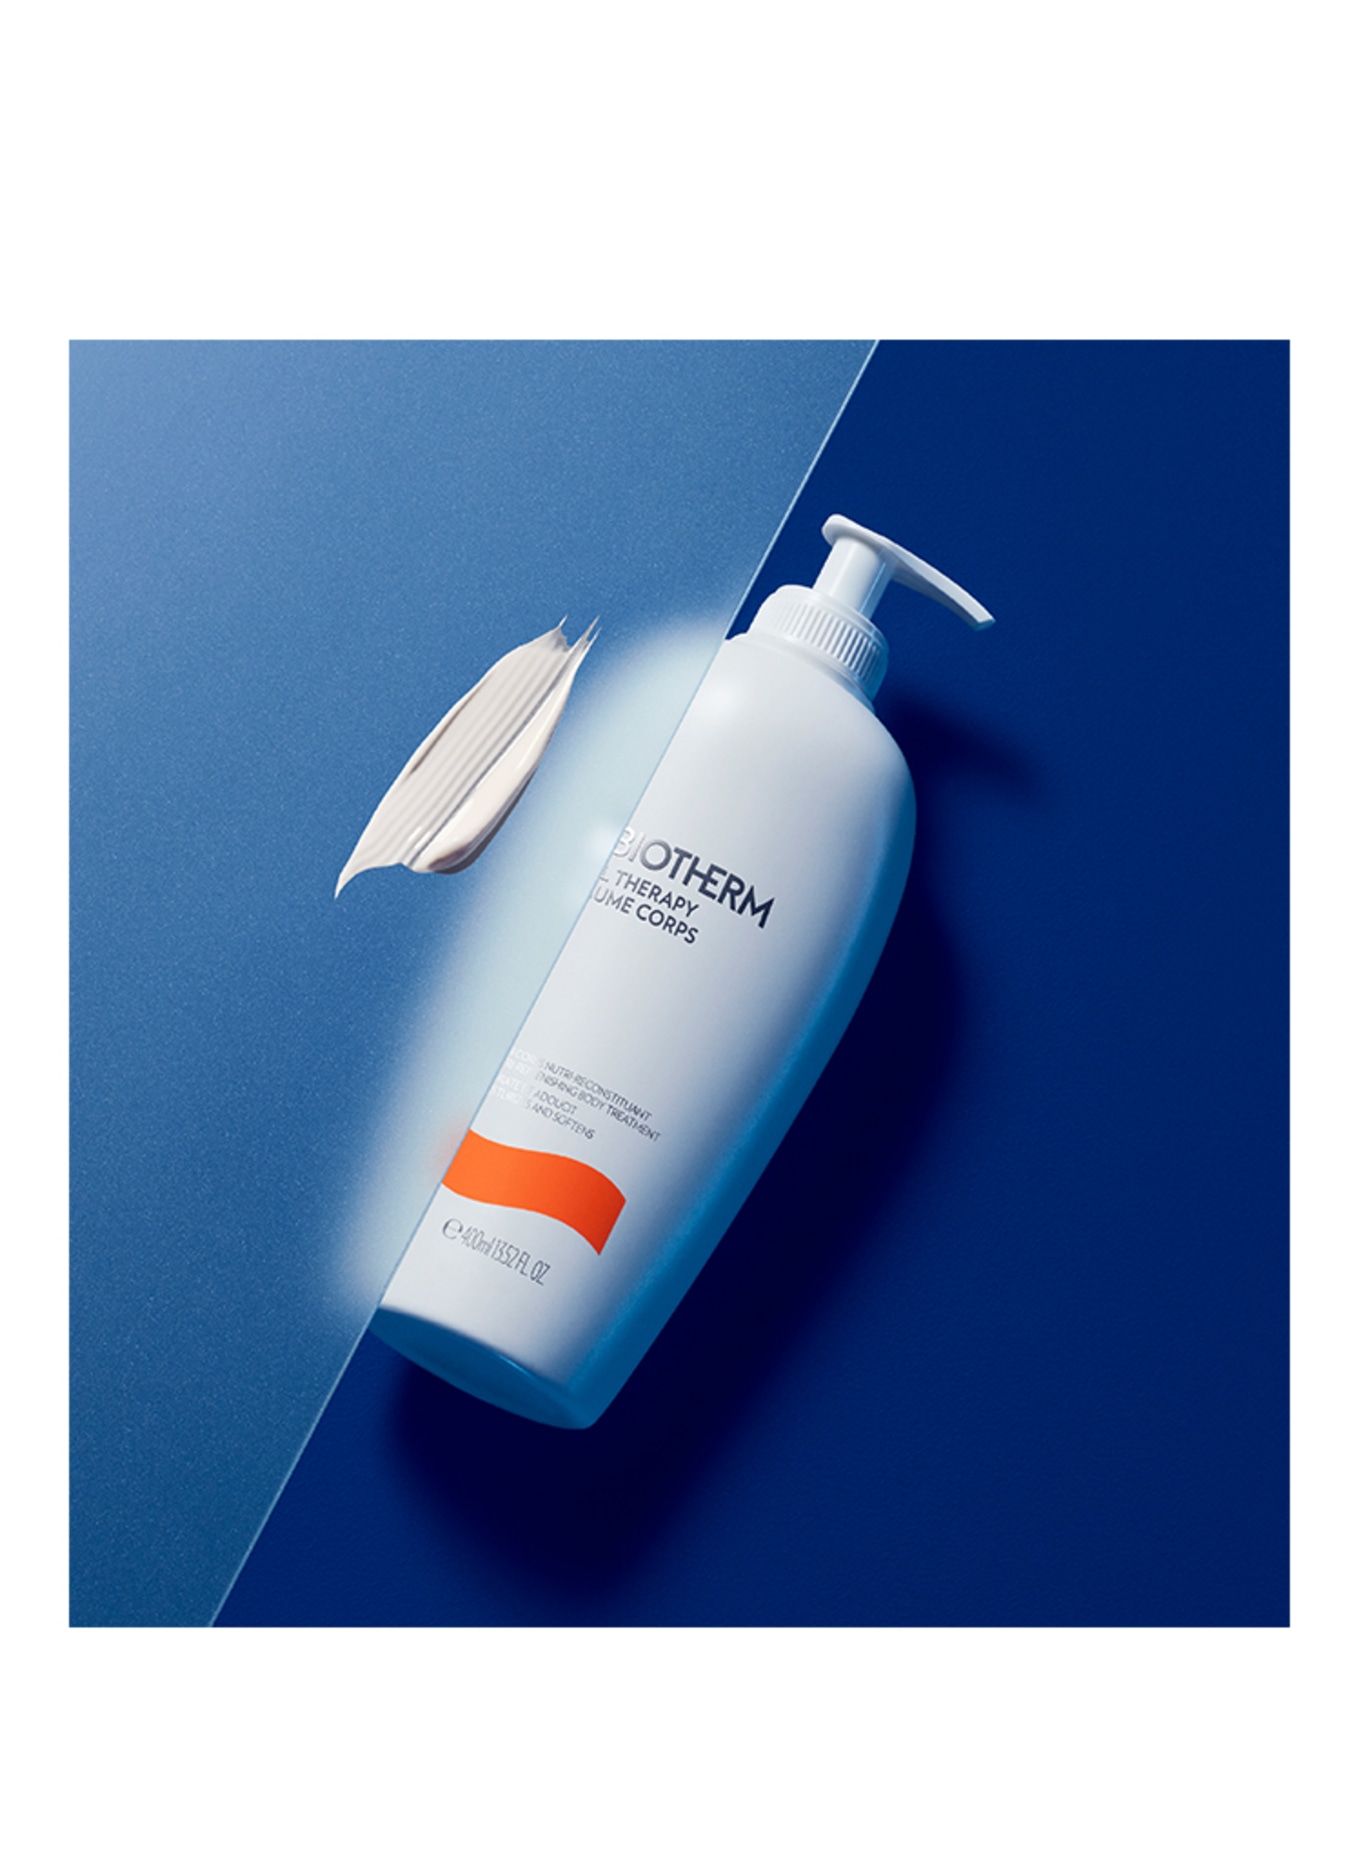 BIOTHERM OIL THERAPY BAUME CORPS (Obrázek 2)